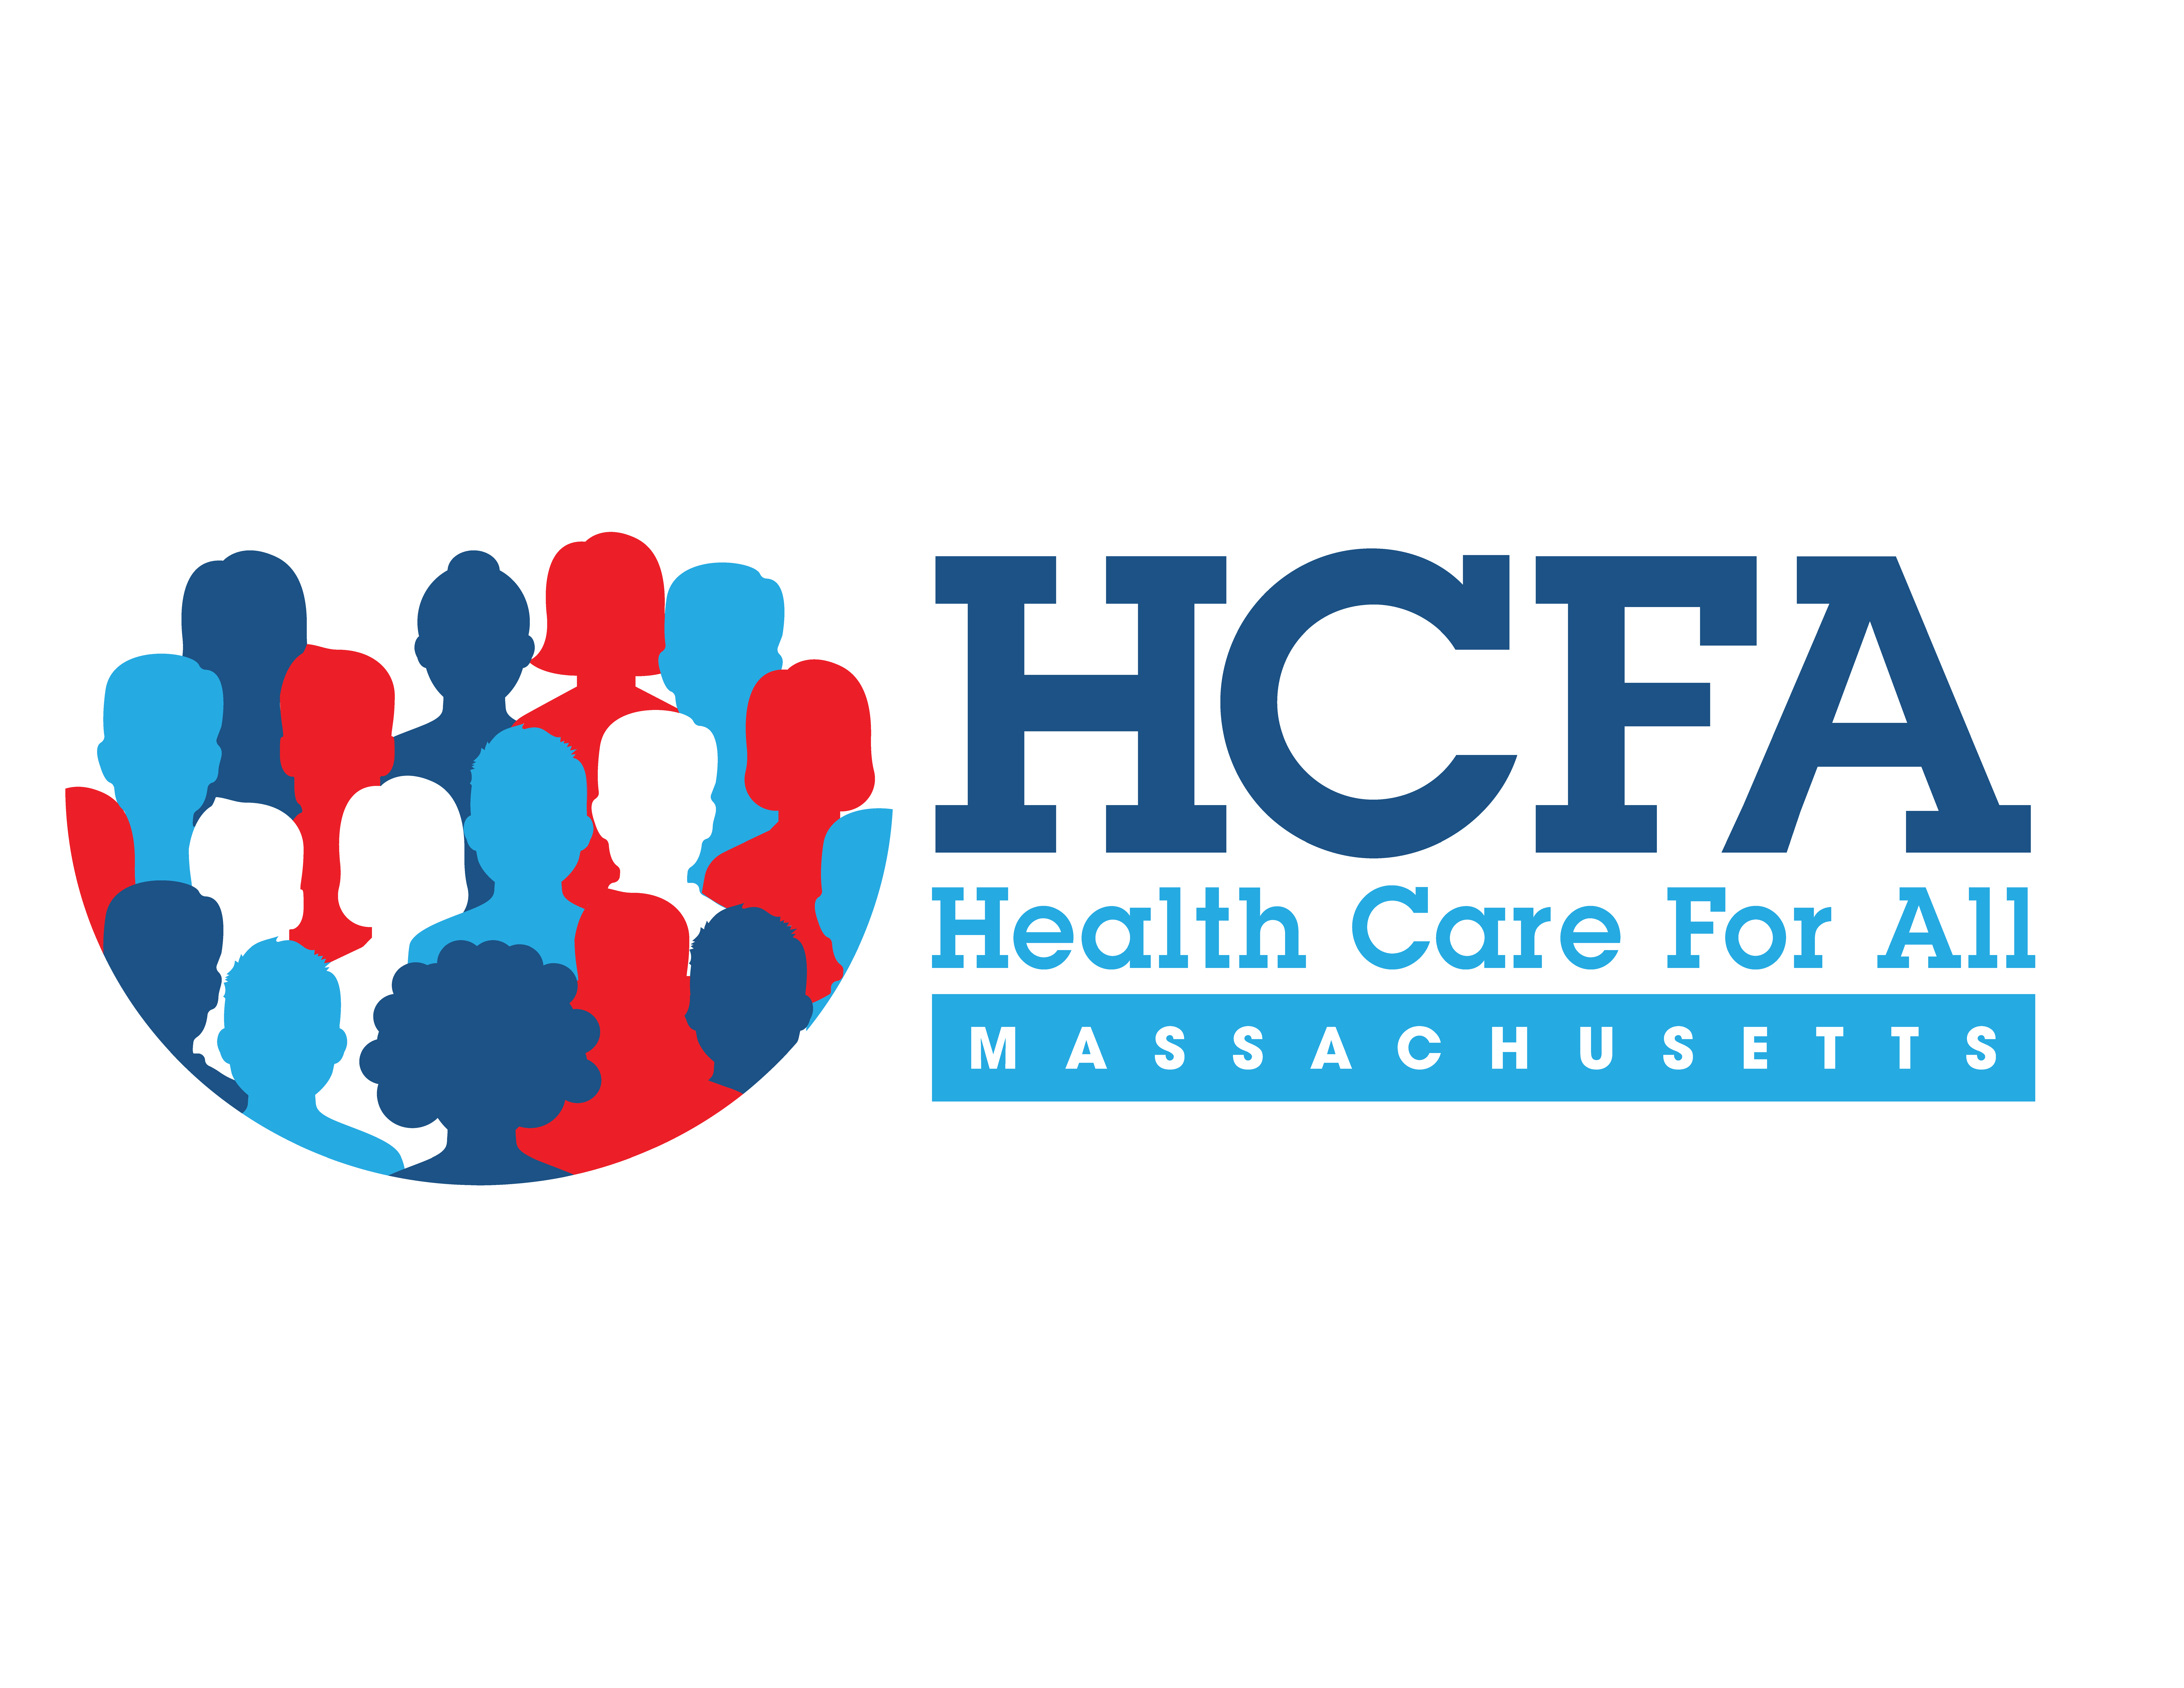 They seek to provide full health insurance to undocumented children in Mass.